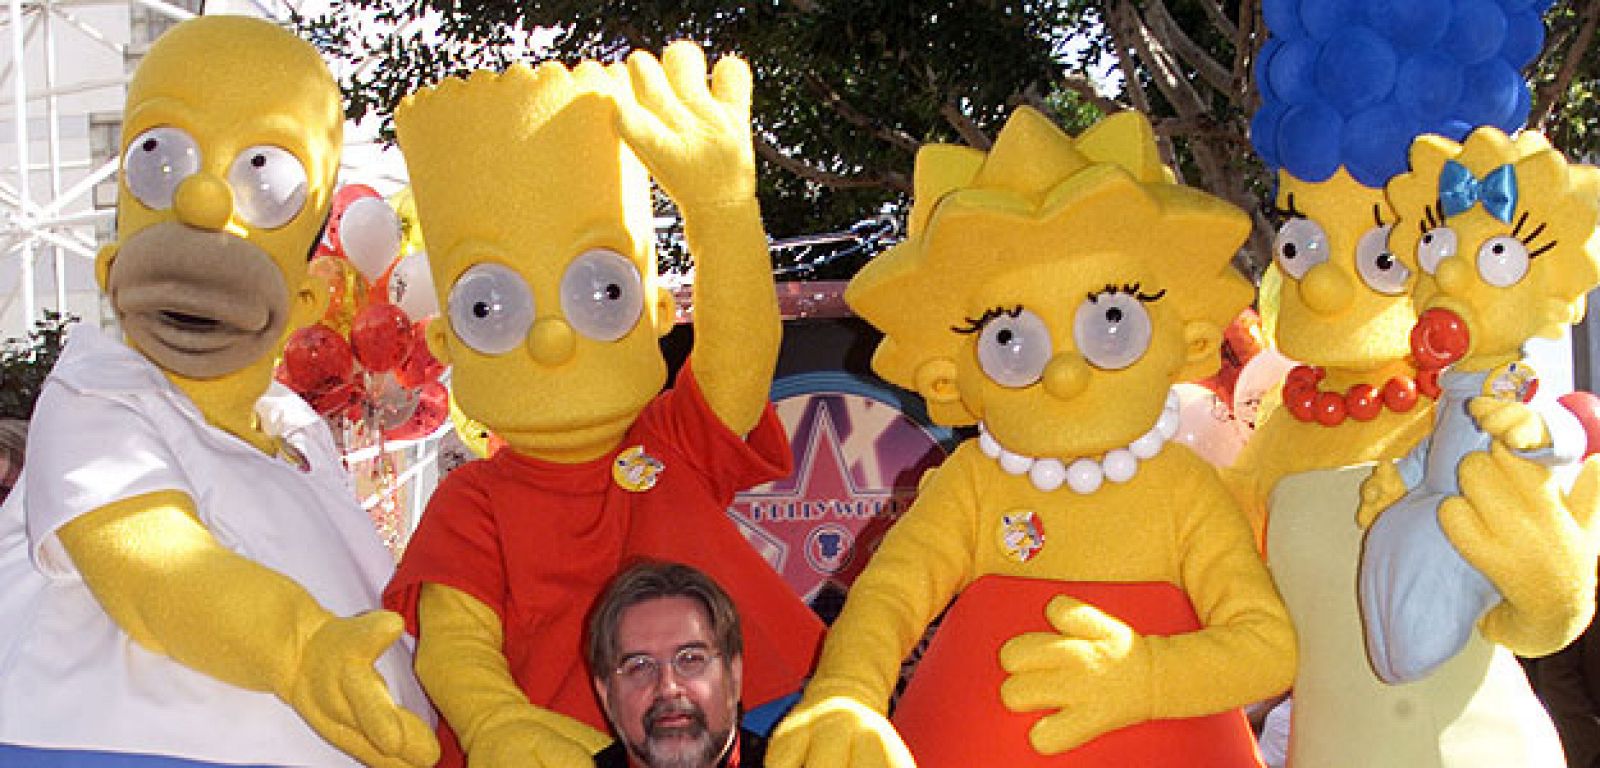 SIMPSONS AND CREATOR HONORED WITH STAR ON HOLLYWOOD WALK OF FAME.